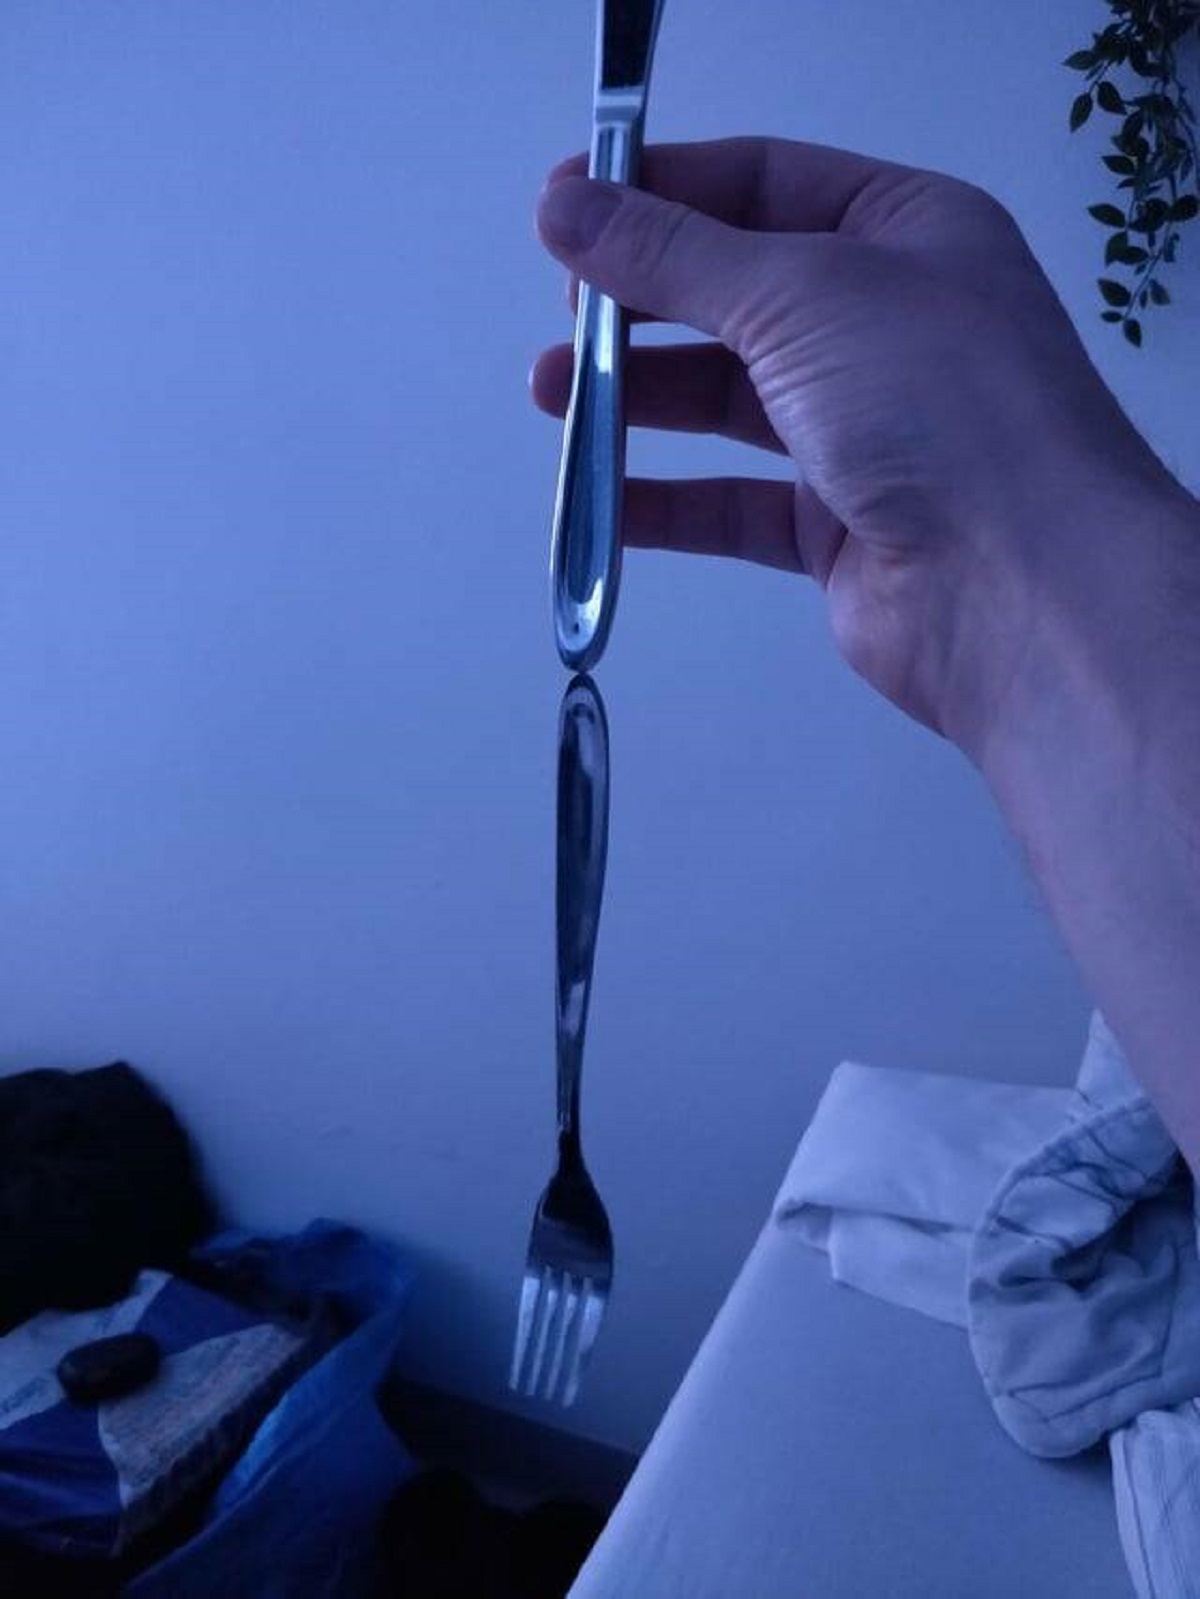 "The cutlery at the hospital I'm at is magnetic"